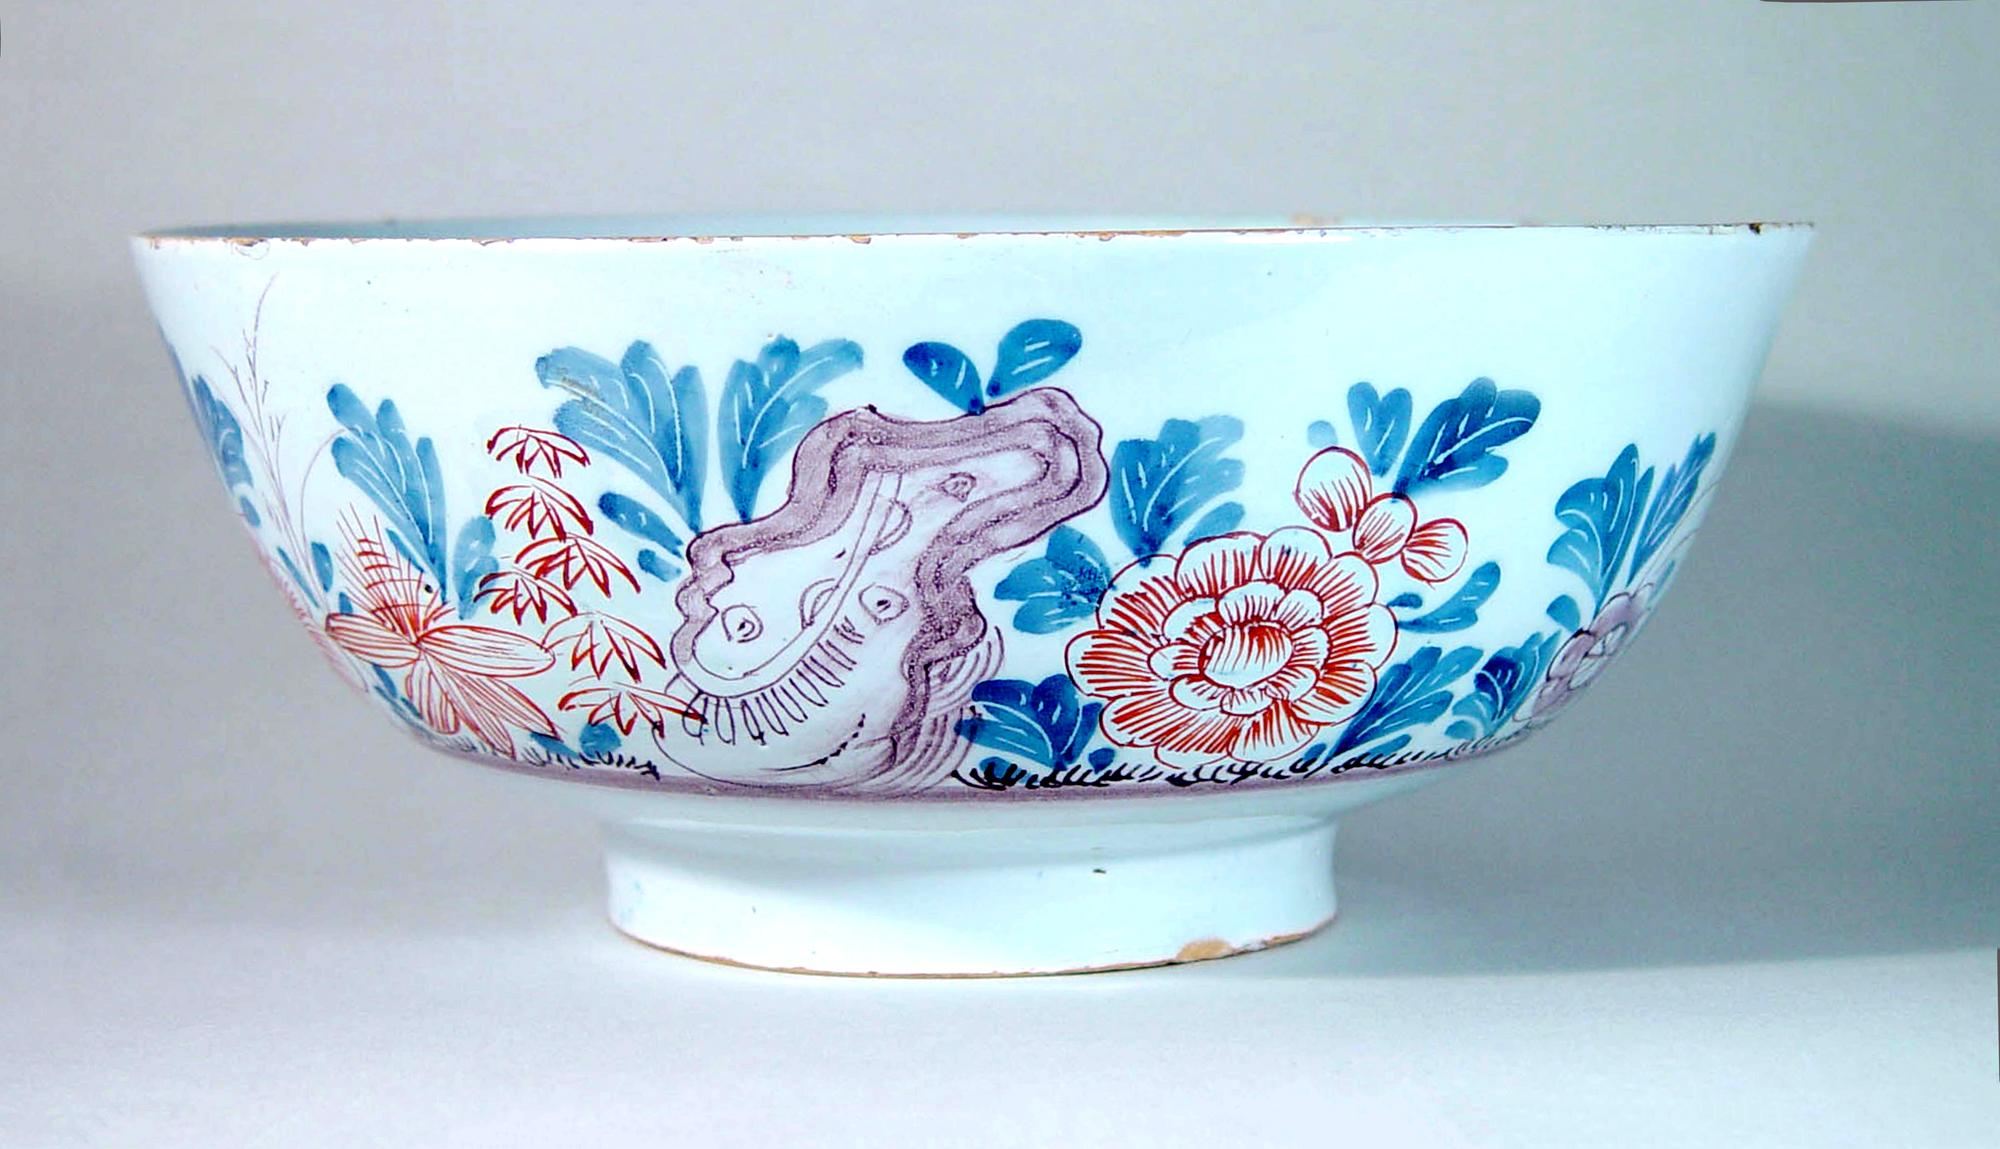 Chinoiserie English Polychrome Delftware bowl,
Bristol,
Circa 1760

The bowl with a depiction of Chinoiserie flowers and plants with rockwork in iron-red, blue, and manganese. The scene runs around three-quarters of the bowl. In the central well